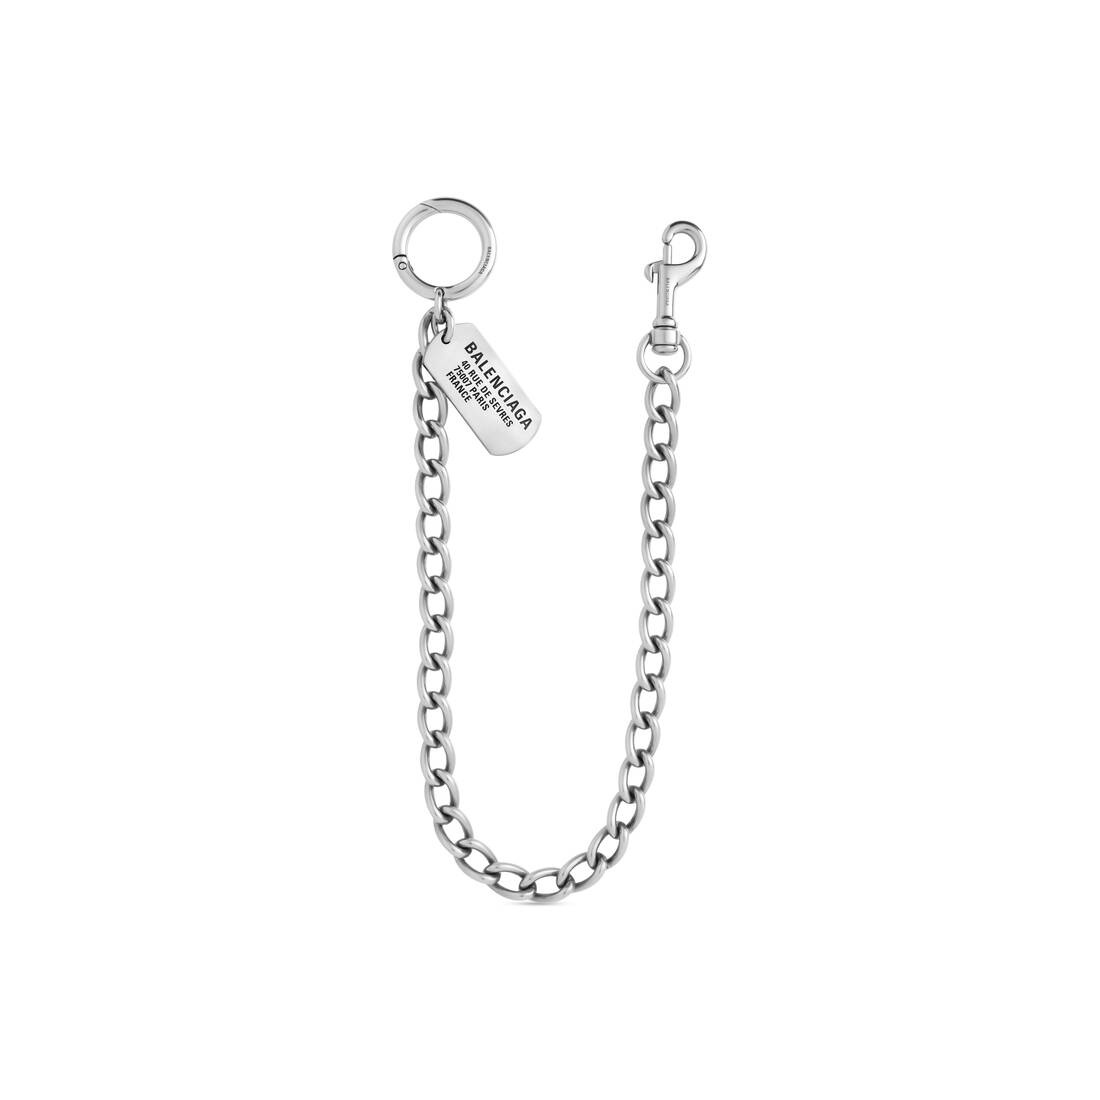 Tags Trouser Chain  in Antique Silver - 1